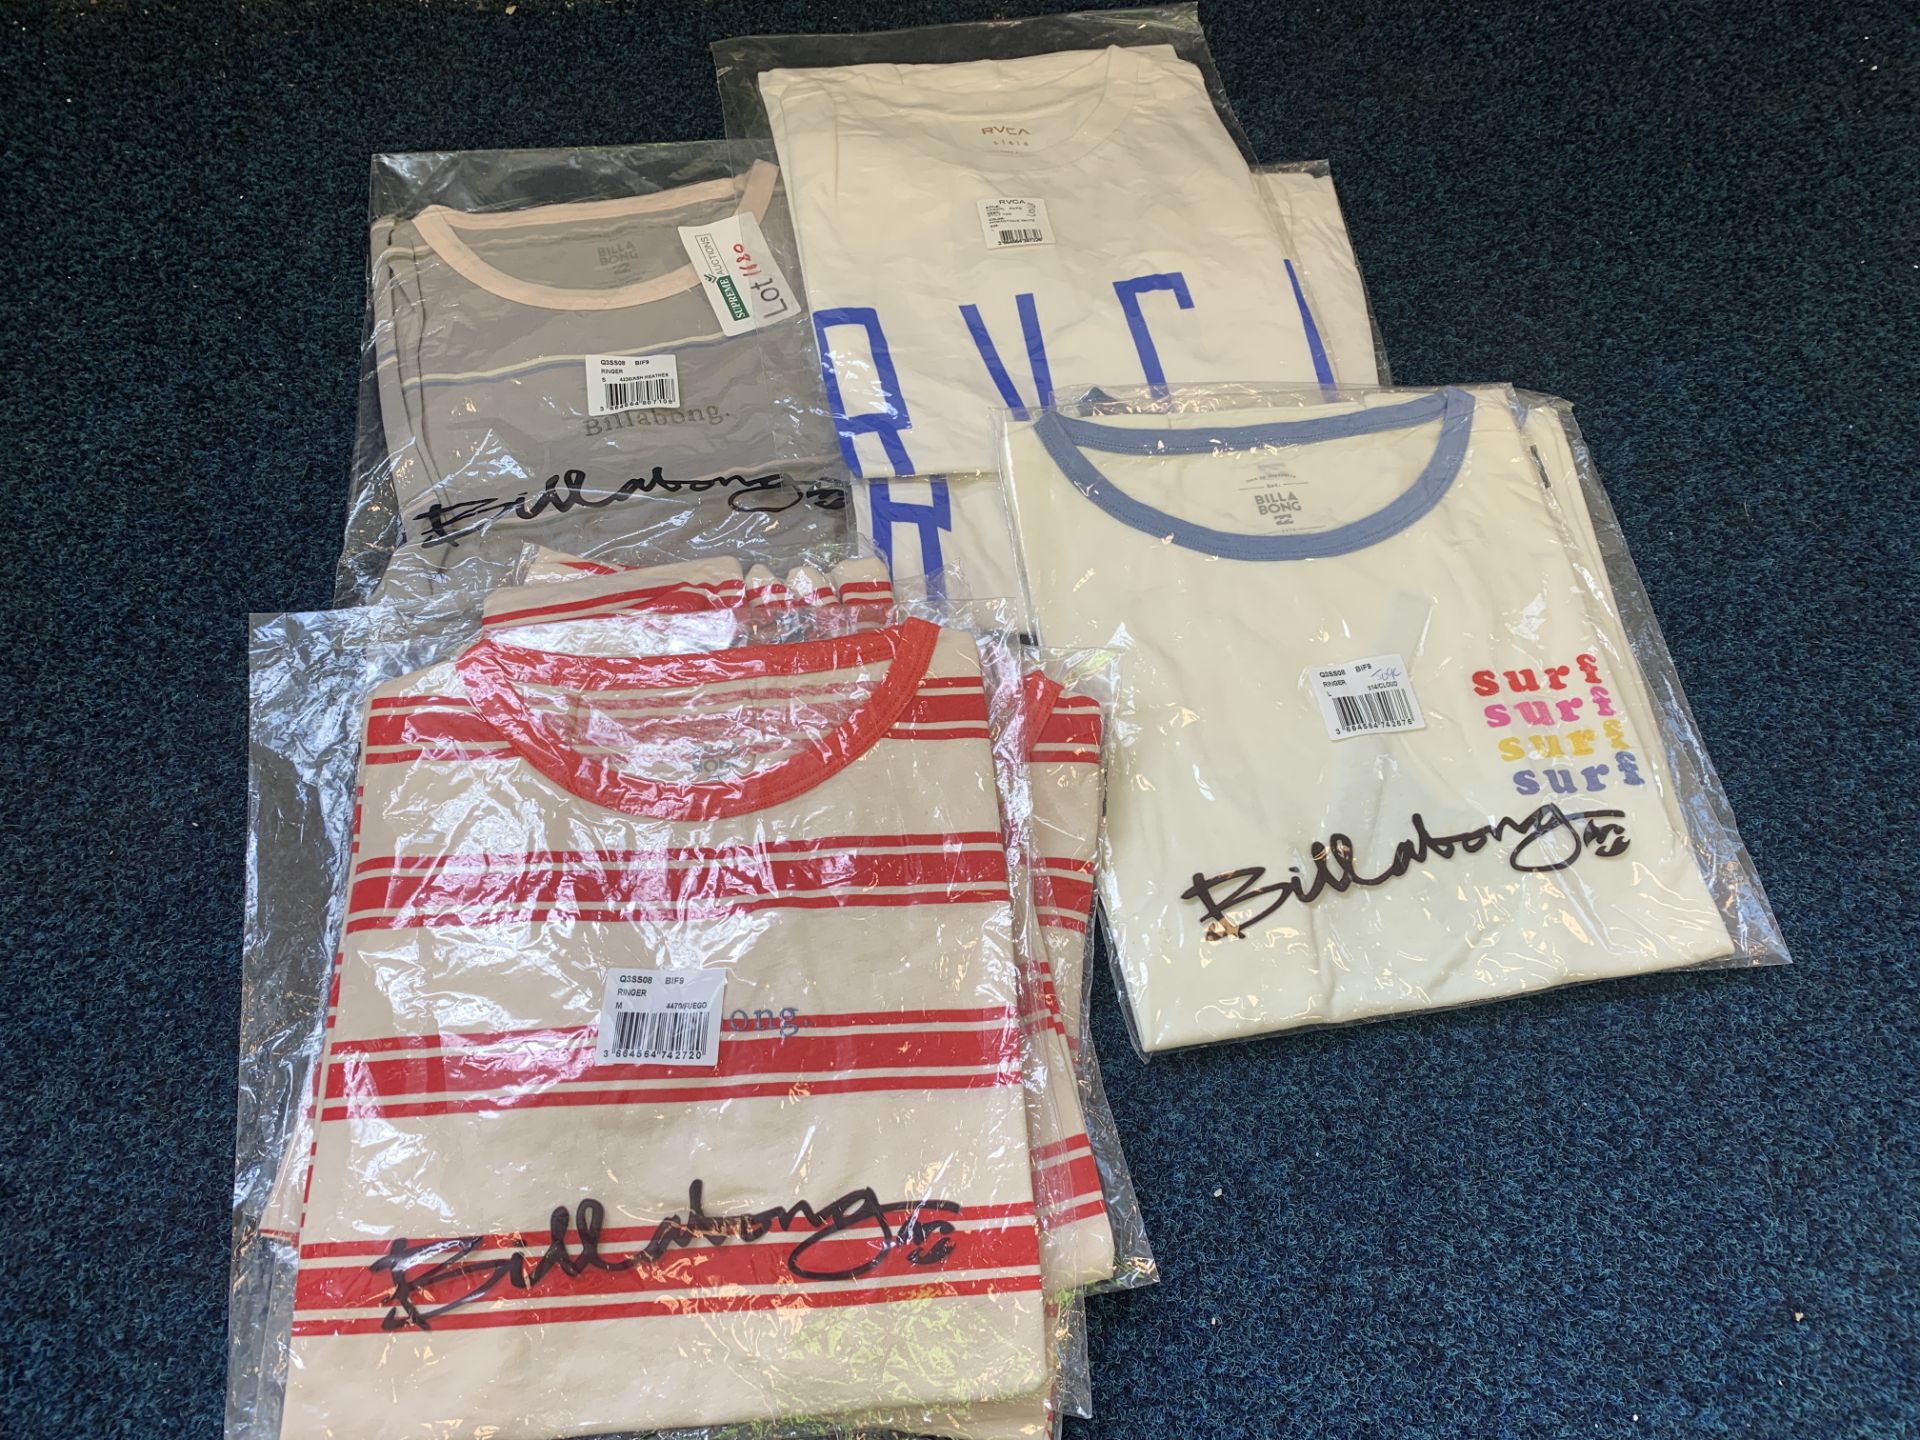 10 X BRAND NEW BILLABONG/RVCA TOPS IN VARIOUS STYLES AND SIZES RRP £275